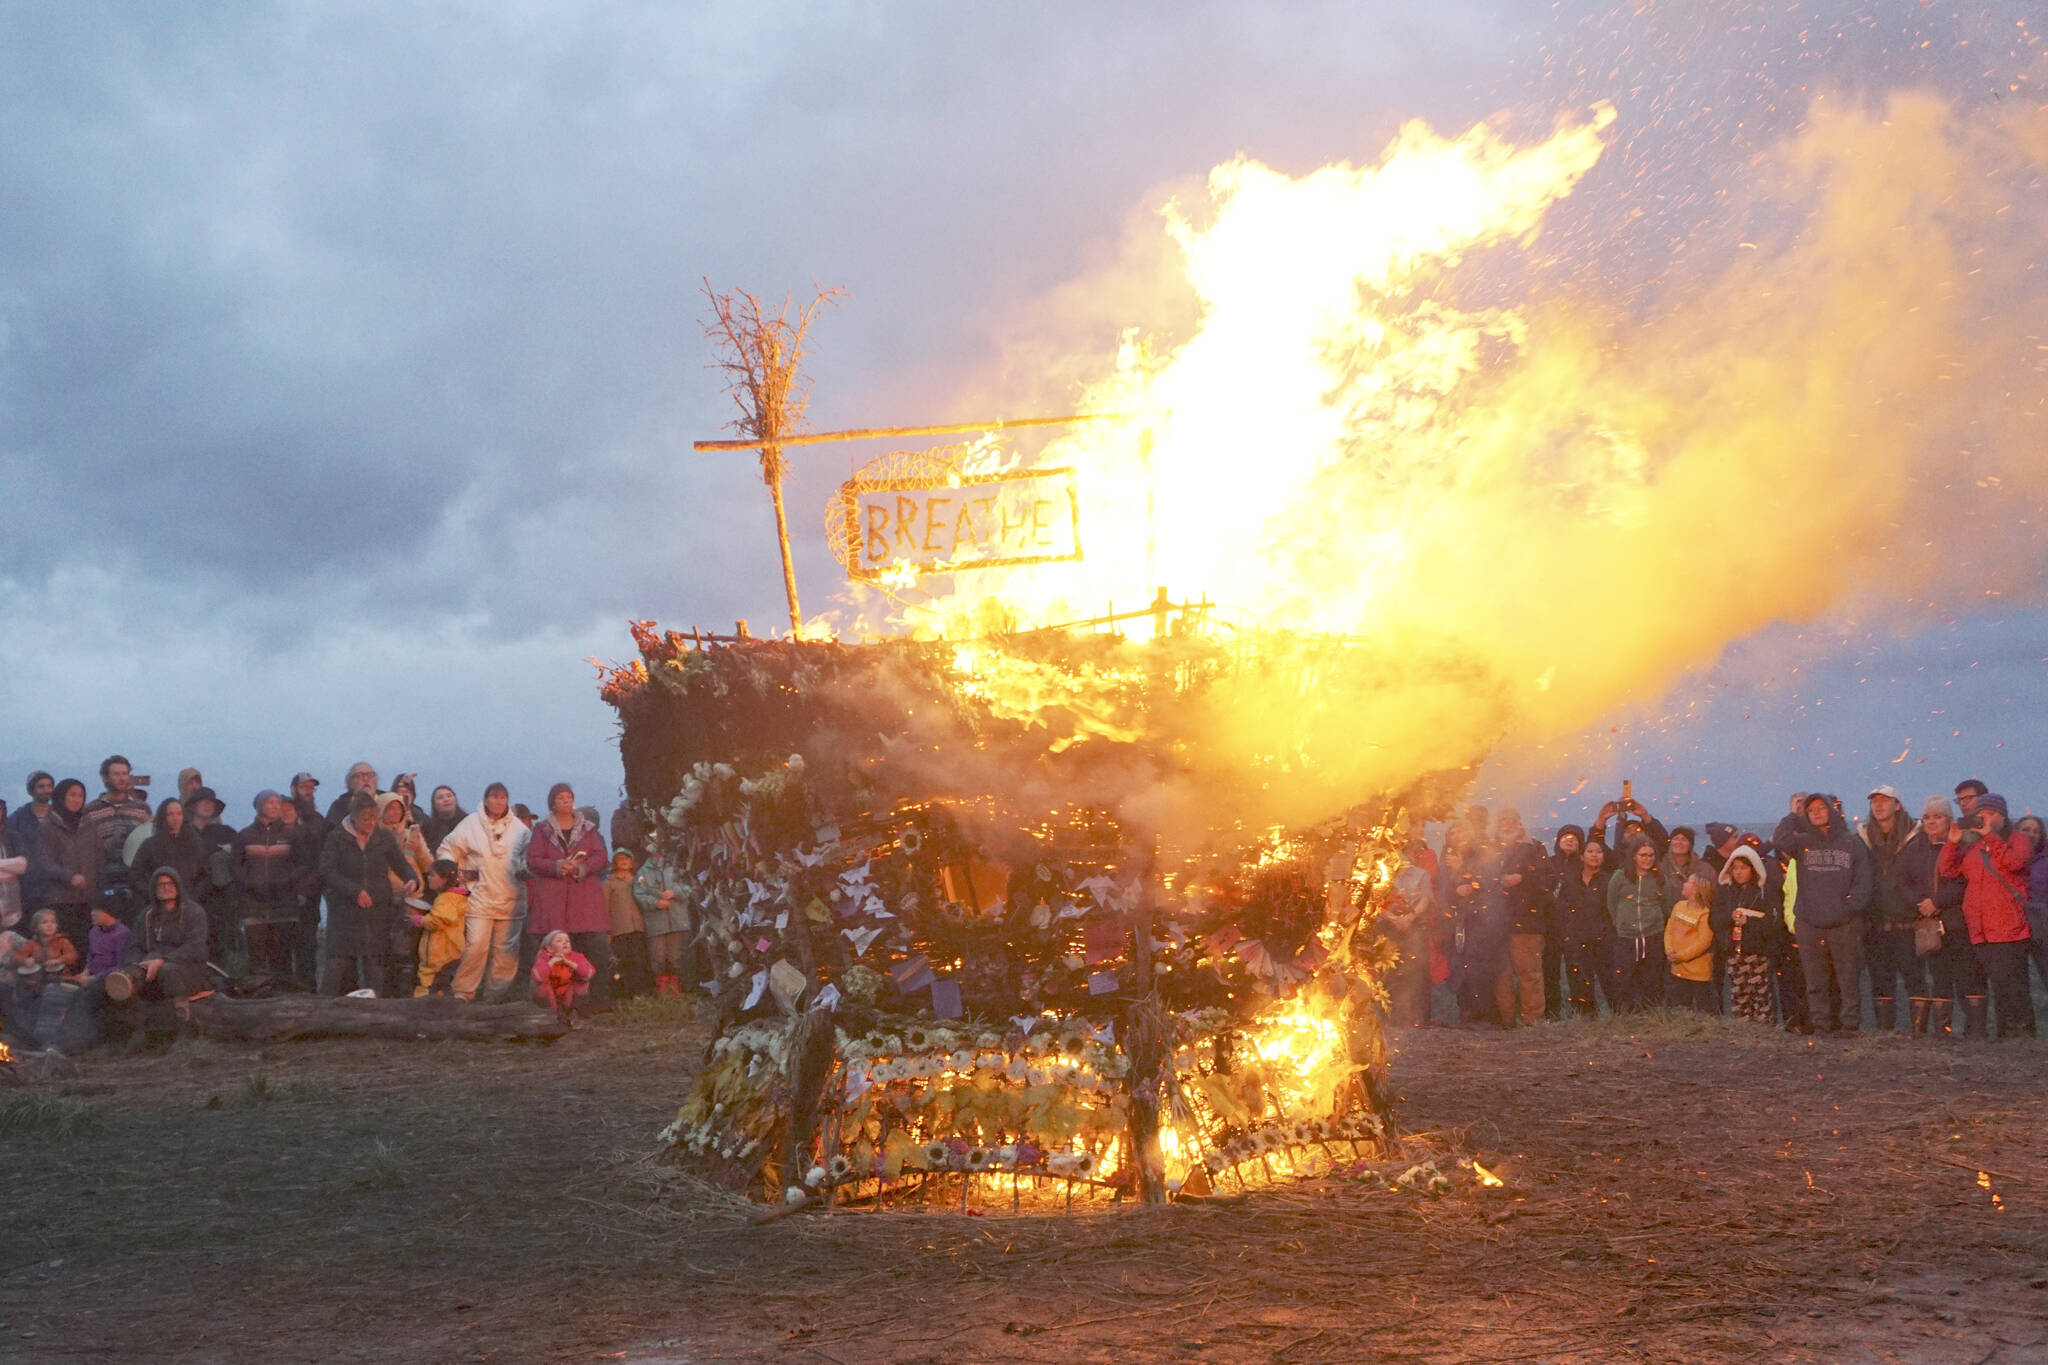 As about 200 people watch, the 19th annual Burning Basket, "Breathe," catches fire on Sunday, Sept. 11, 2022, at Mariner Park on the Homer Spit in Homer, Alaska. (Photo by Michael Armstrong/Homer News)